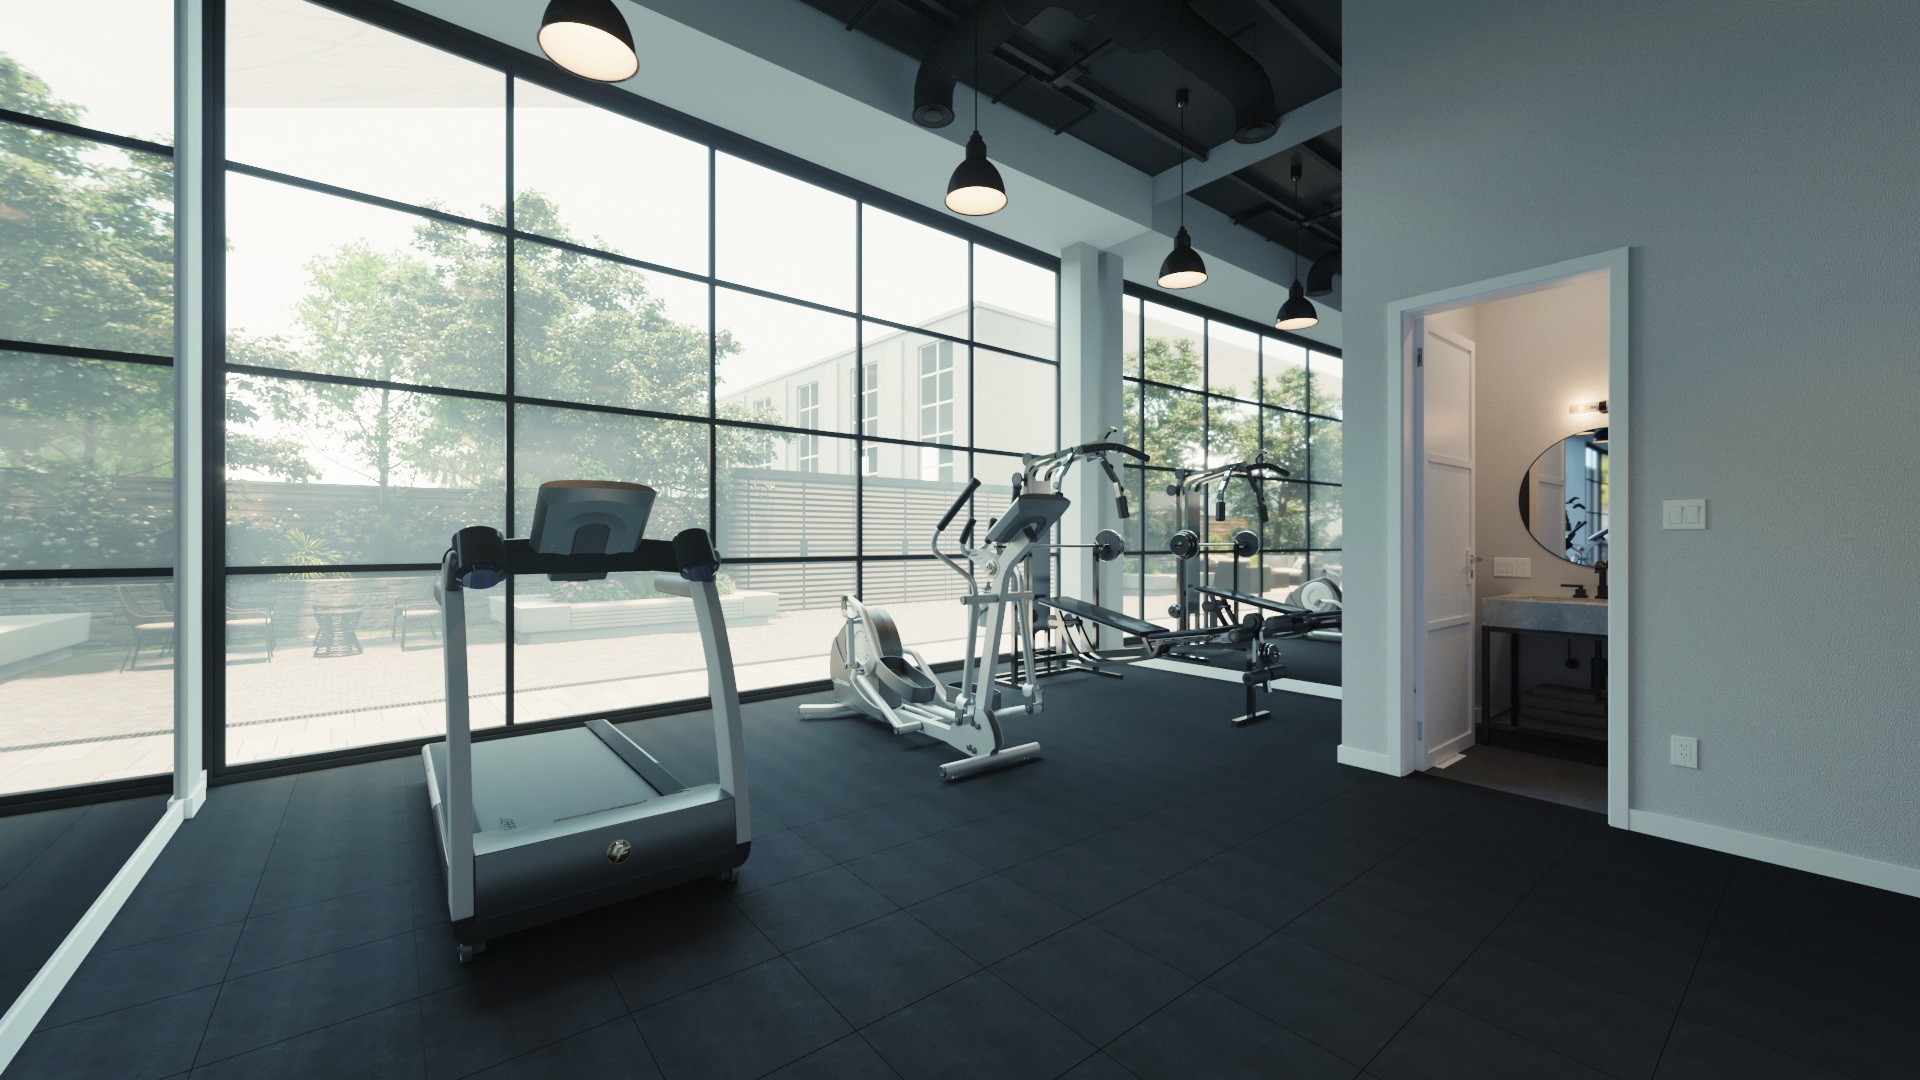 300 Geary gym with various fitness equipment